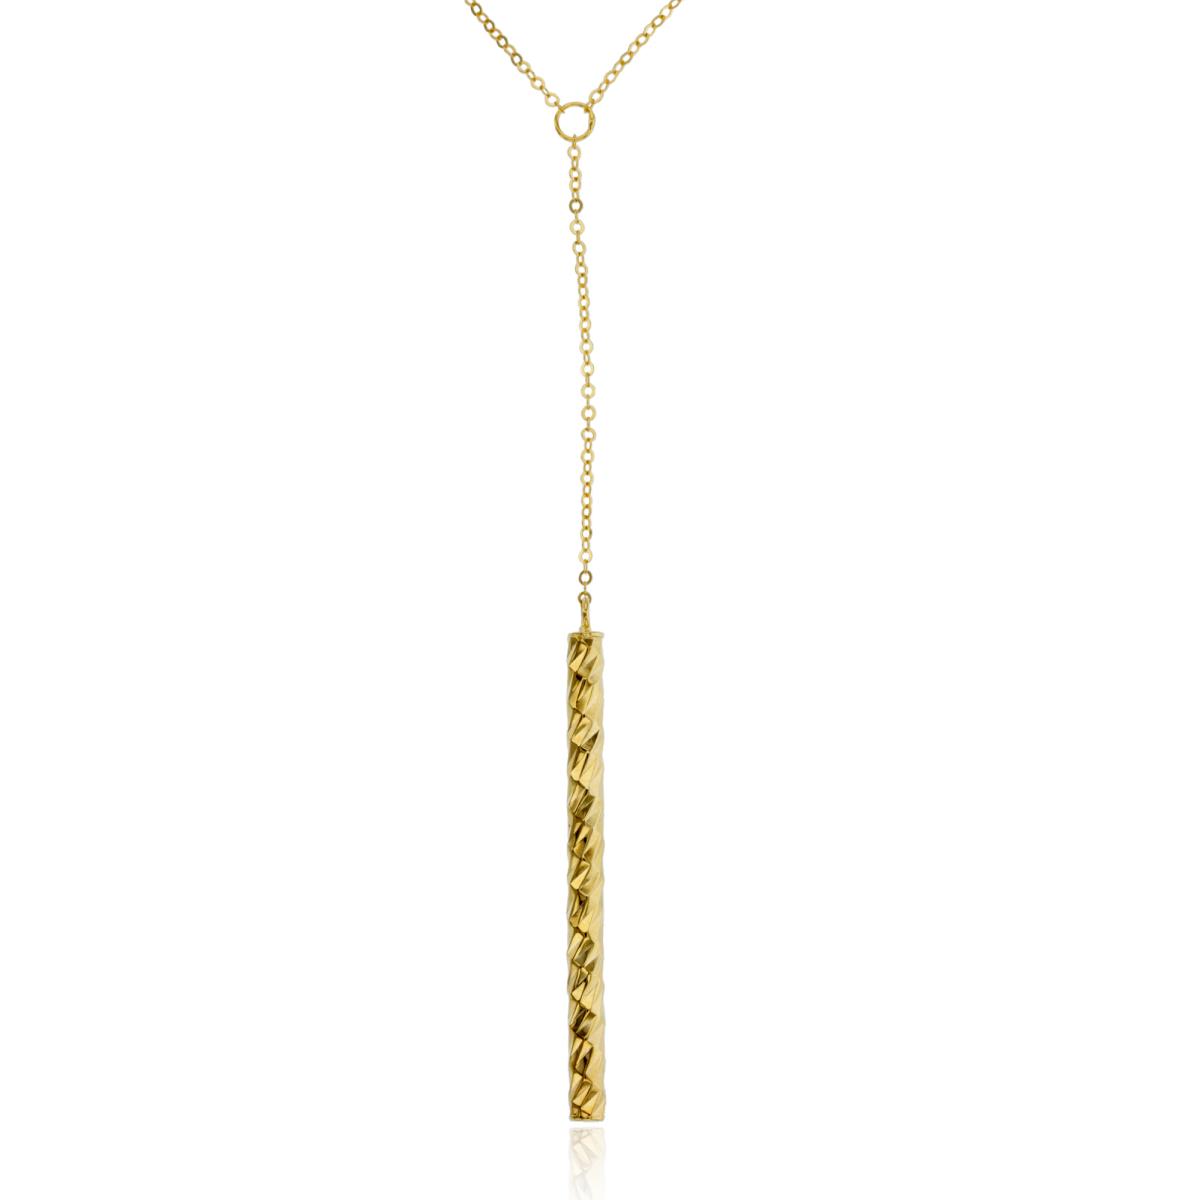 14K Yellow Gold DC Vertical Bar Dangling on 1.5"chain 16"+2"Necklace